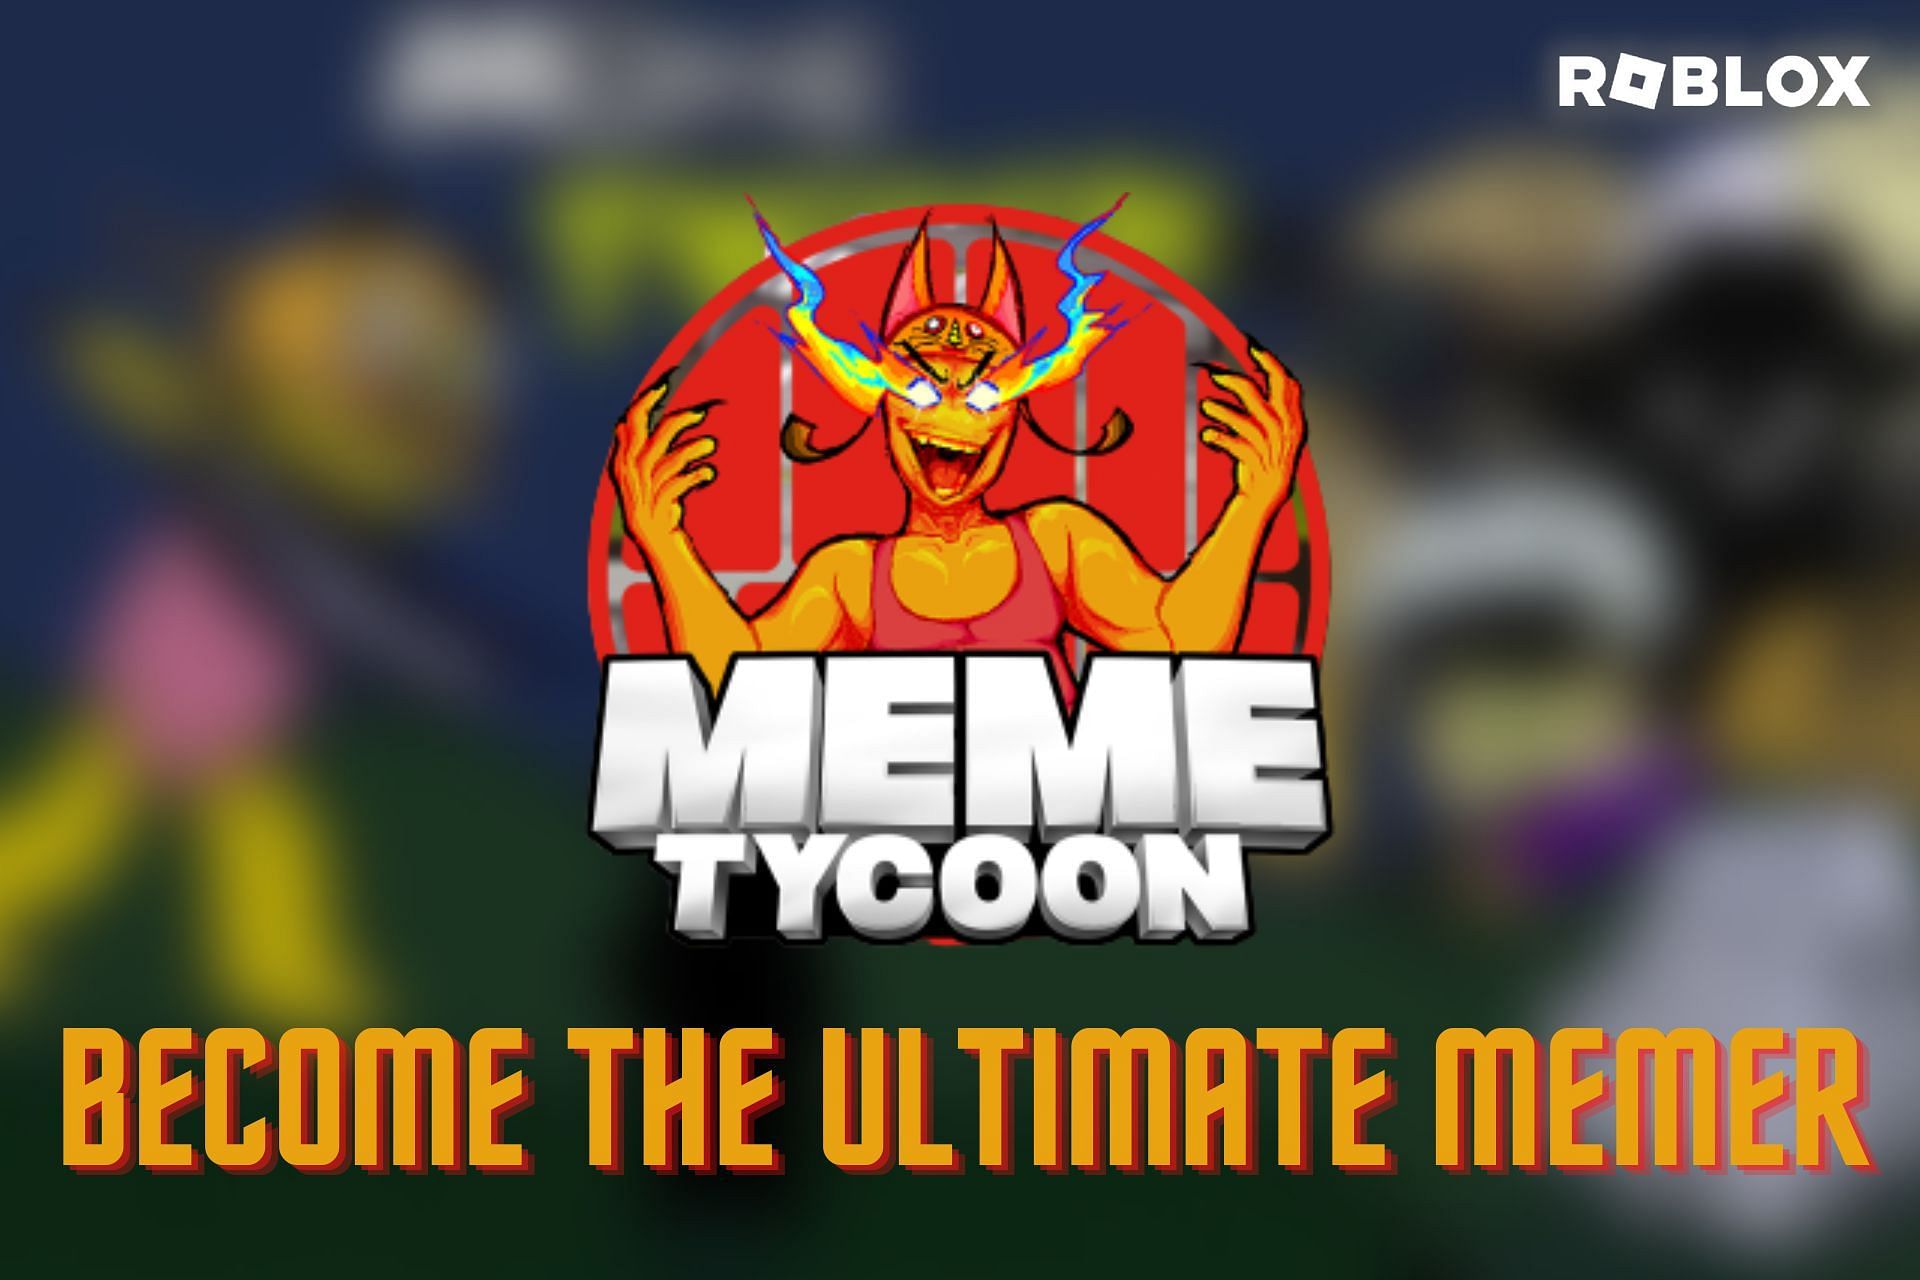 Roblox Meme Tycoon : Become the greatest Meme Lord ever! (Image via Roblox)